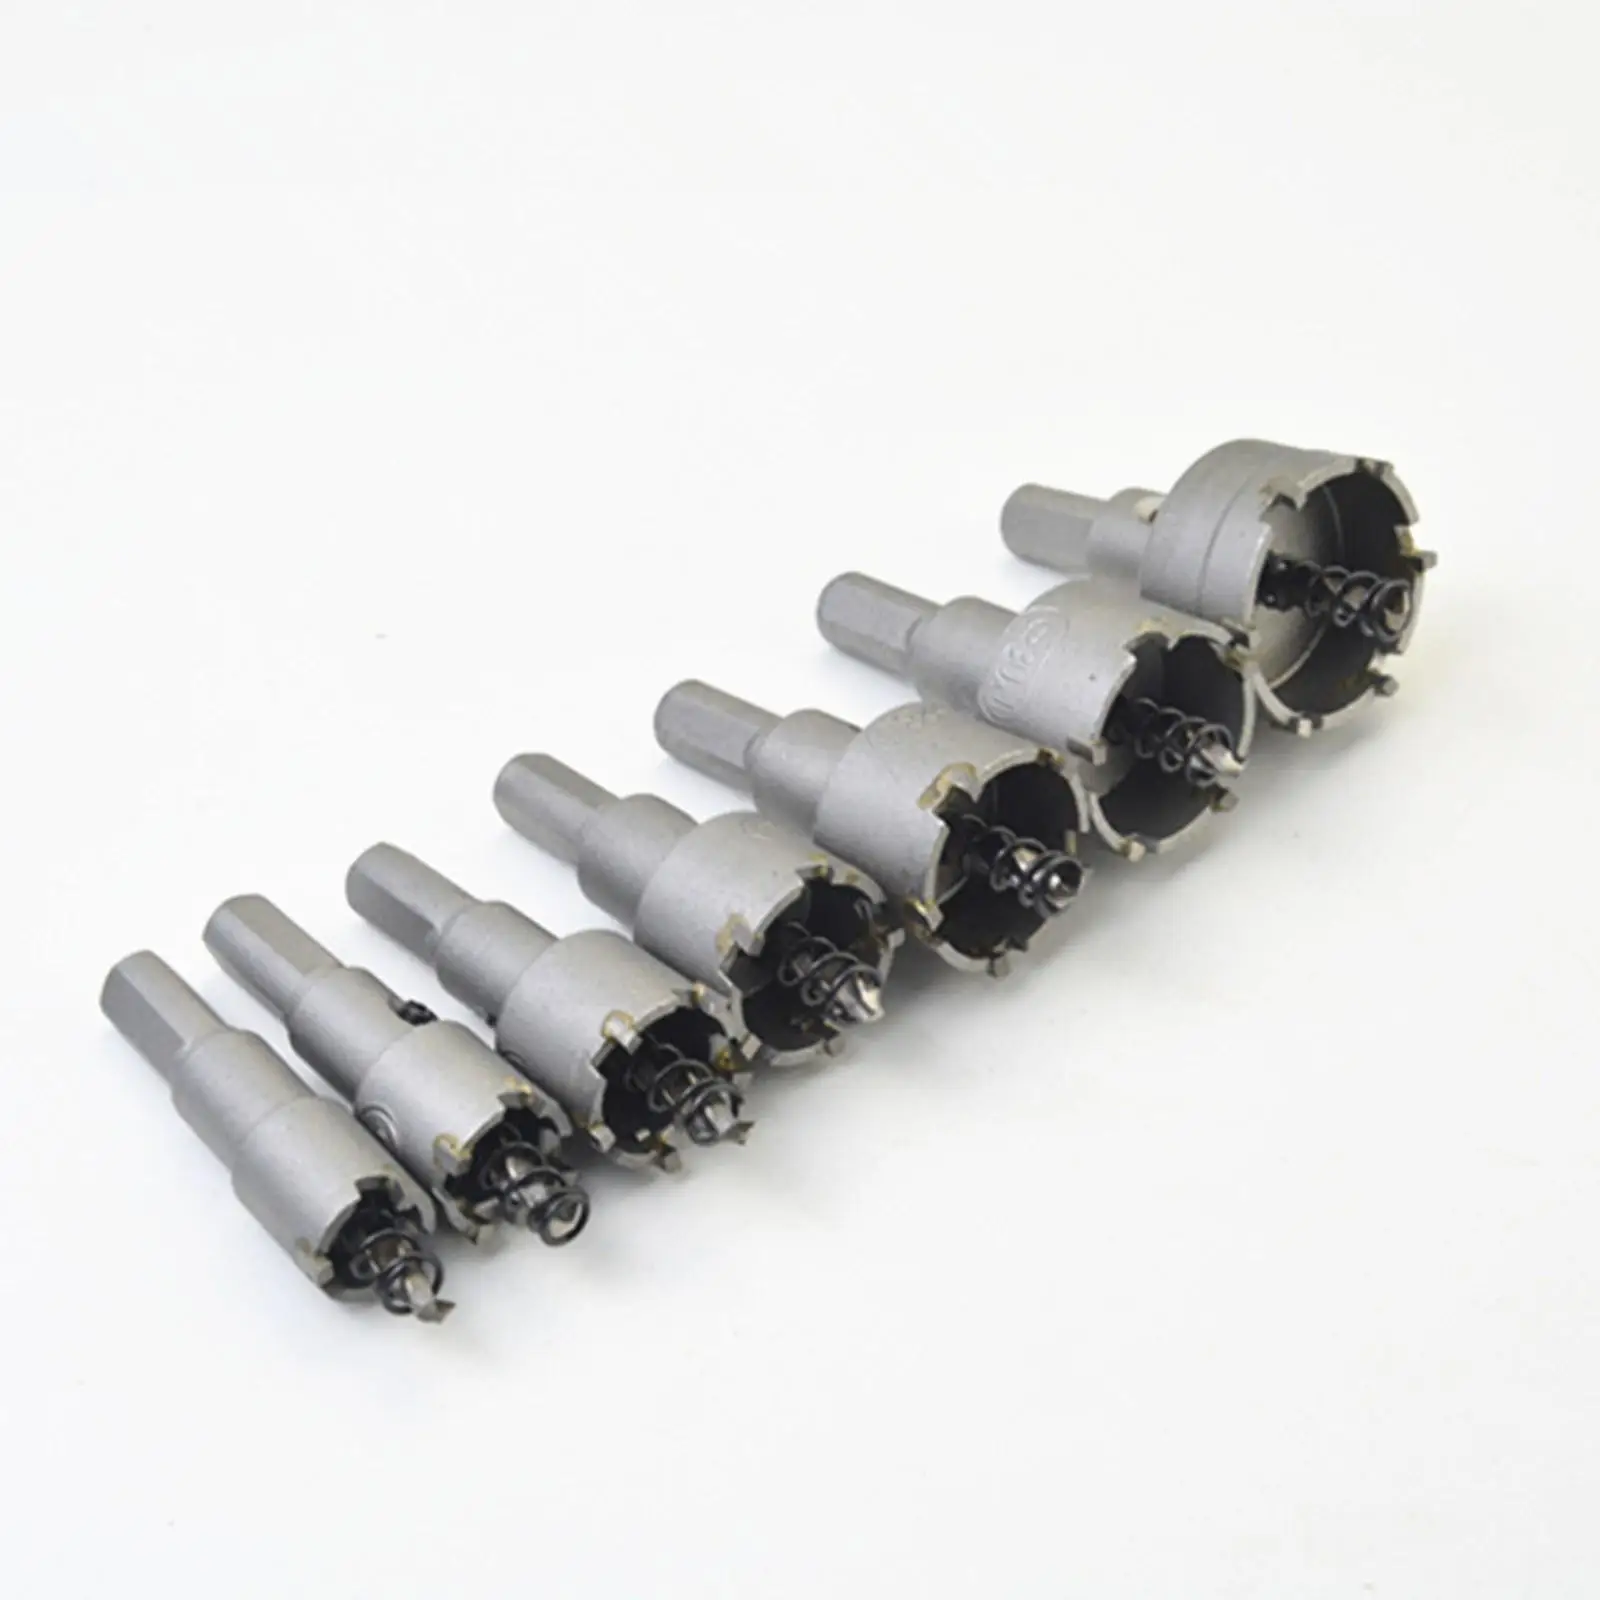 12 Pieces Hole Drill Bit Saw Set Carbide Tipped Hole Opener 15-50mm Hole Cutter Tool for Metal Sheet Iron Stainless Steel Alloy